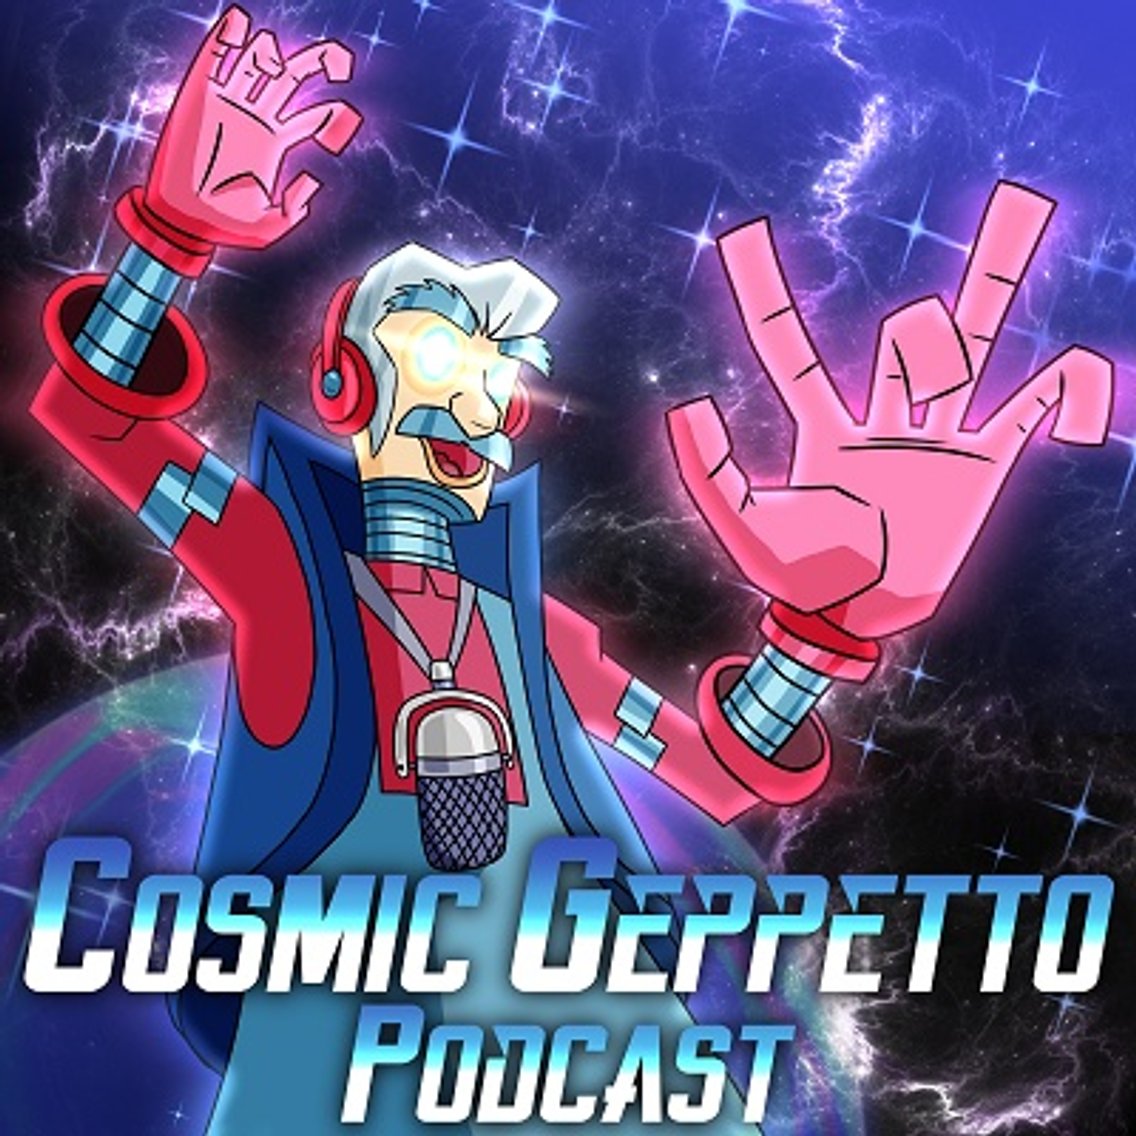 The Cosmic Geppetto Podcast - Cover Image